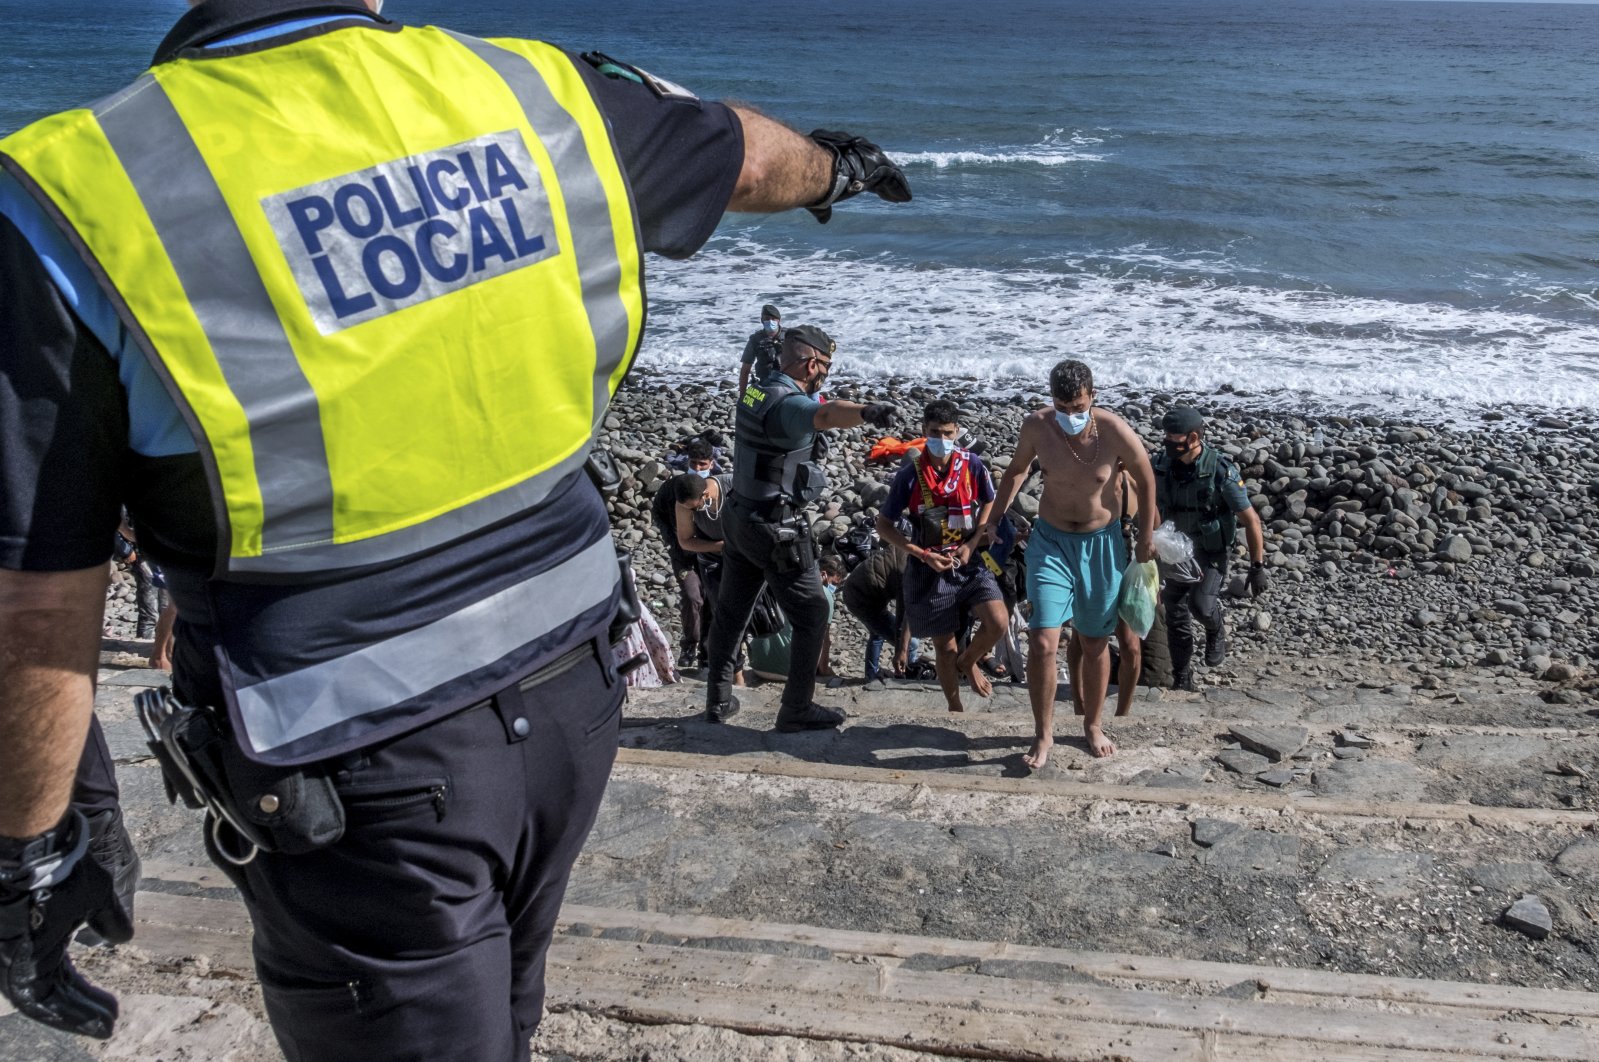 Migrants, most of them from Morocco, are escorted by Spanish police after arriving at the coast of the Canary Islands, Spain, Nov. 23, 2020. (AP Photo)